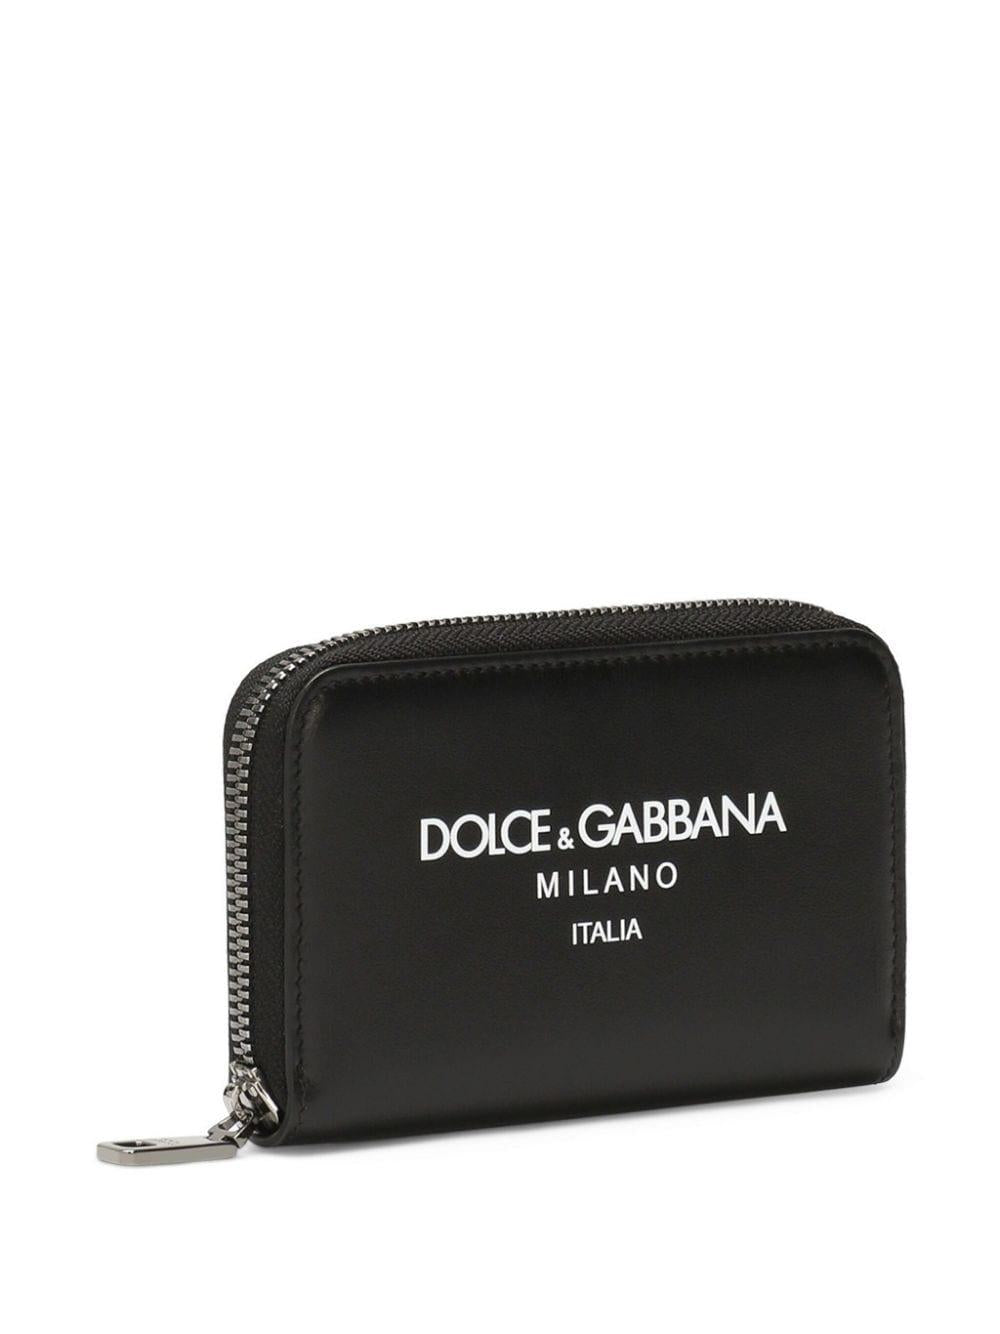 DOLCE & GABBANA Luxury Leather Coin Purse for Men - DG SS24 Collection